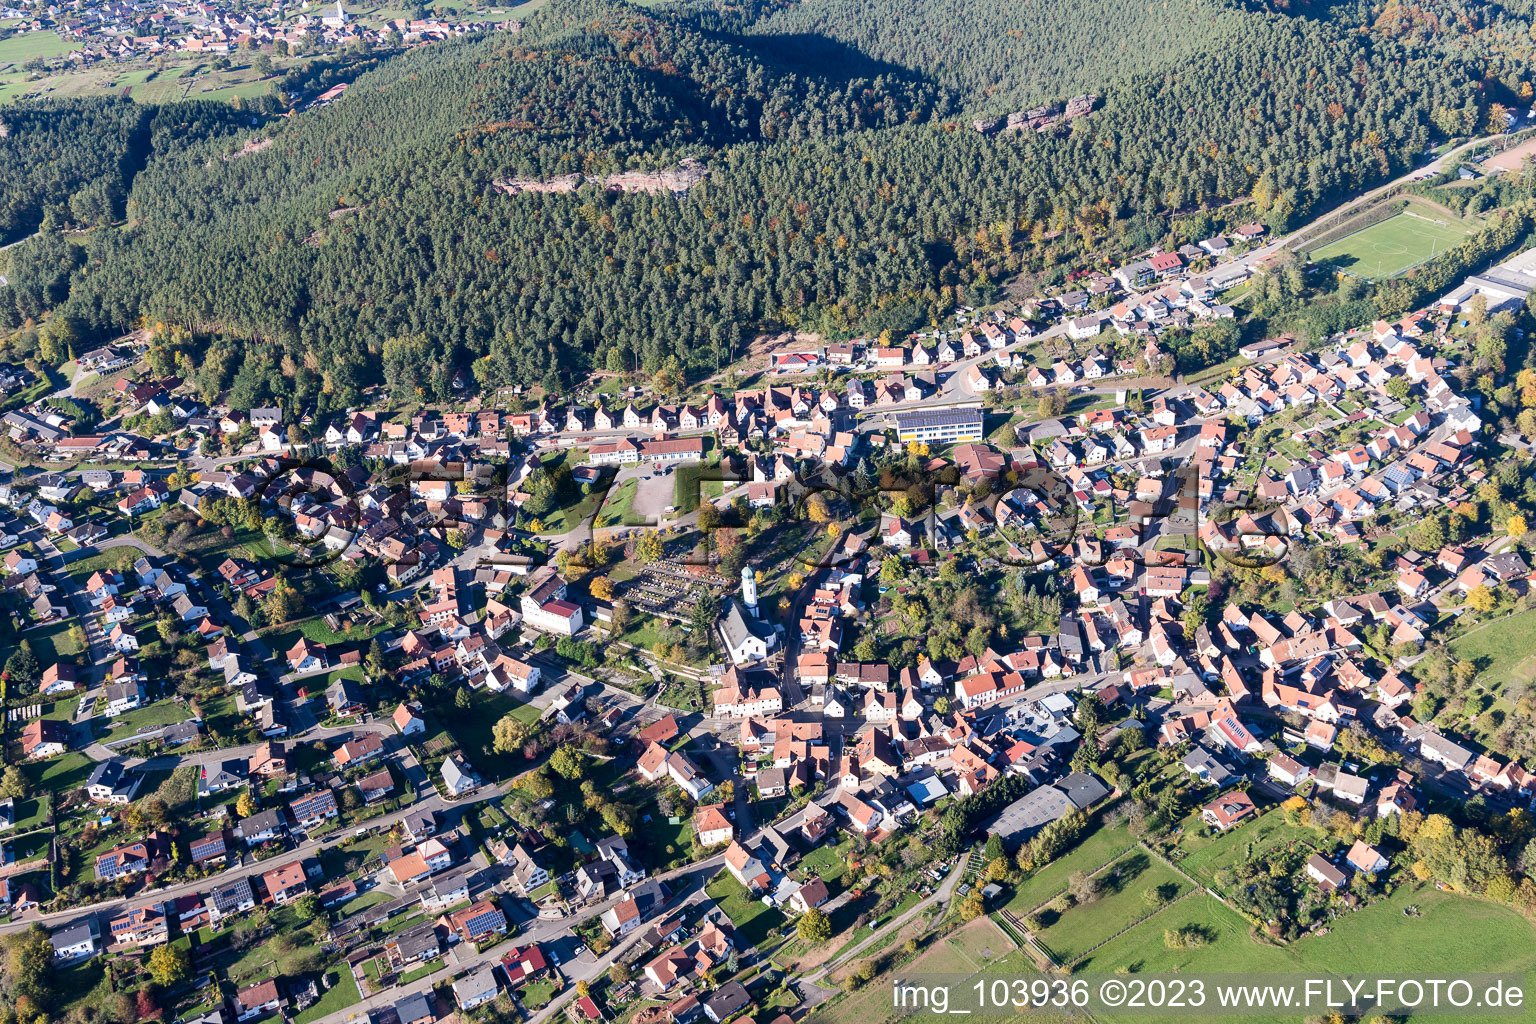 Busenberg in the state Rhineland-Palatinate, Germany seen from above